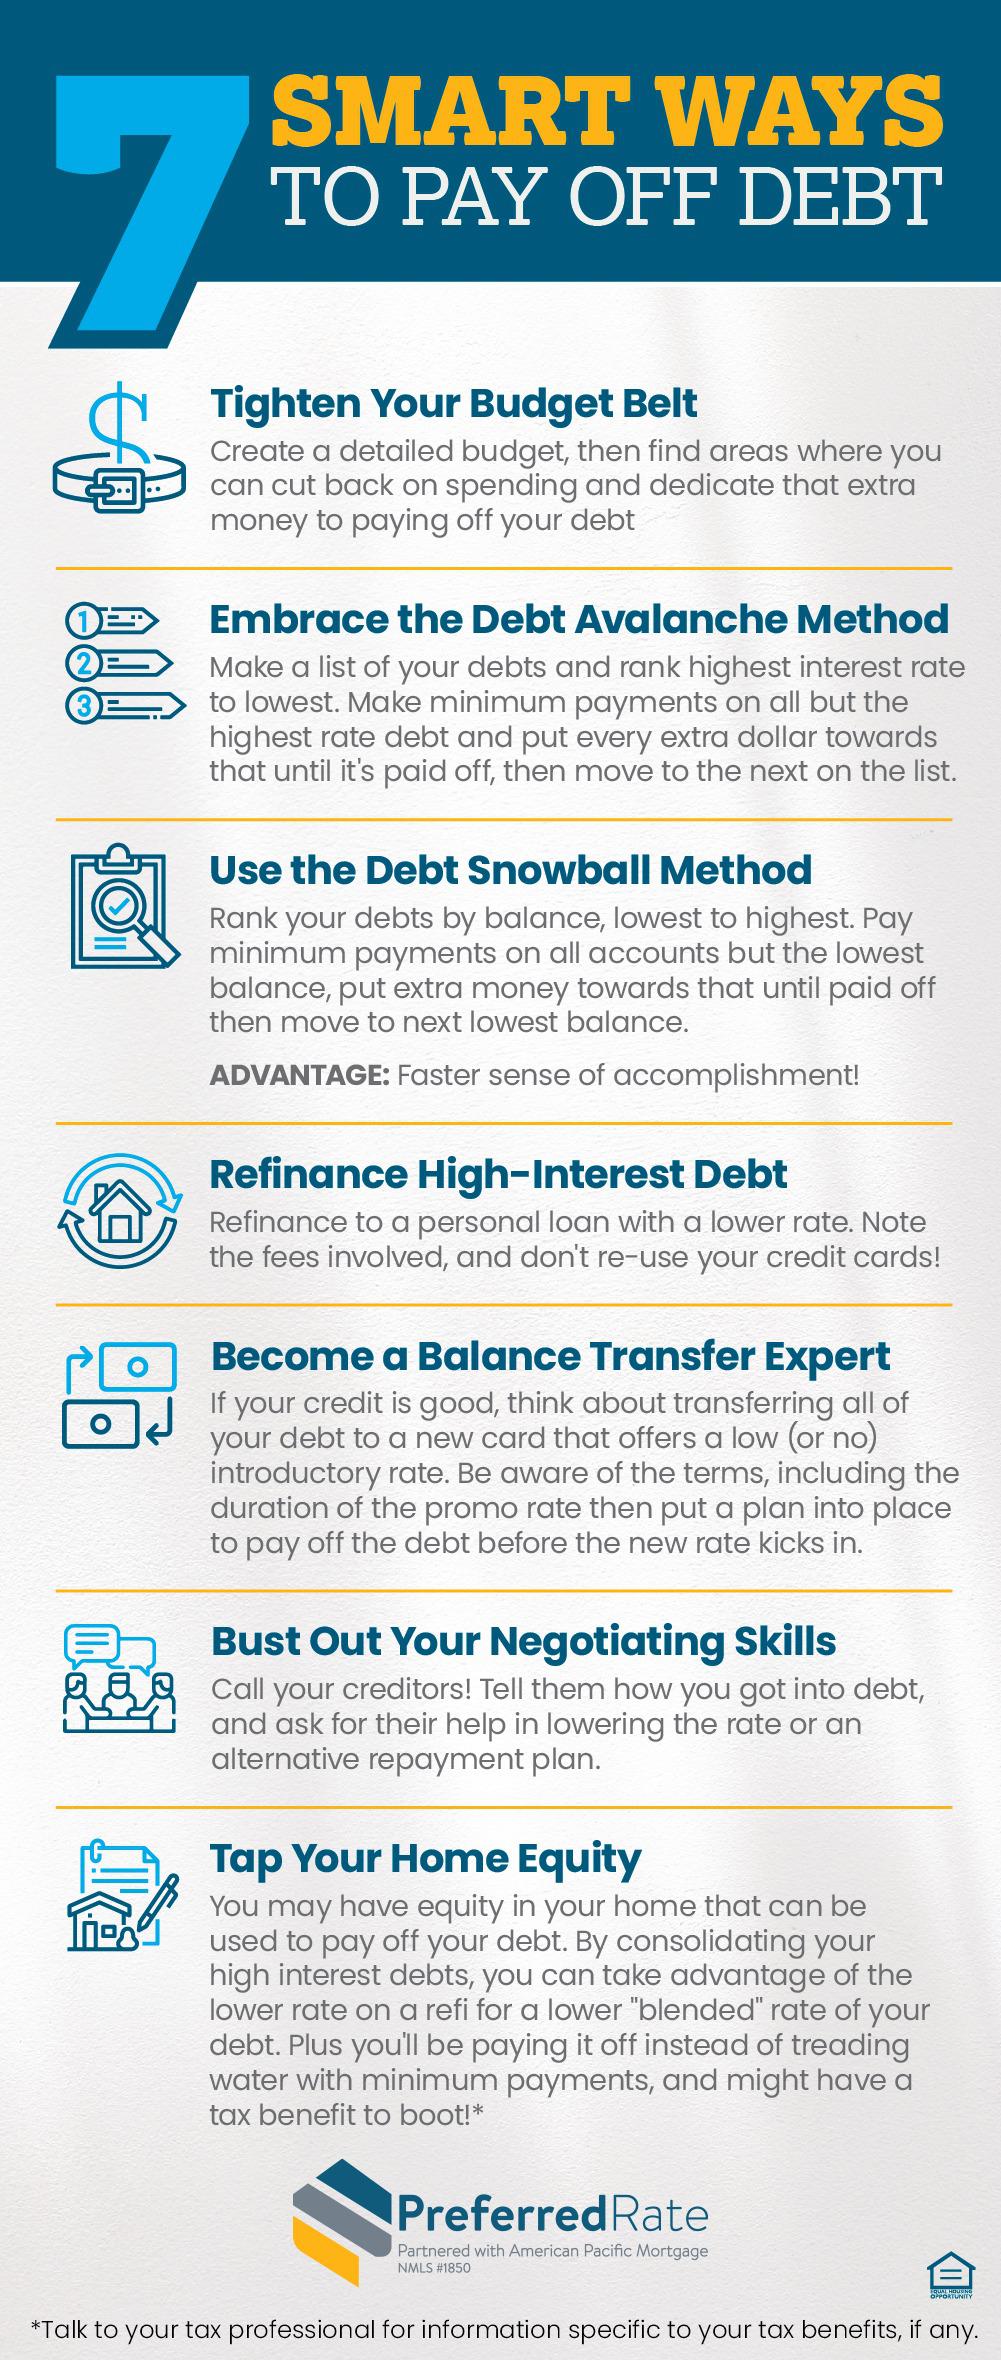 Ditching debt like a boss! Try these savvy strategies to make your financial goals a reality, one smart payment at a time.